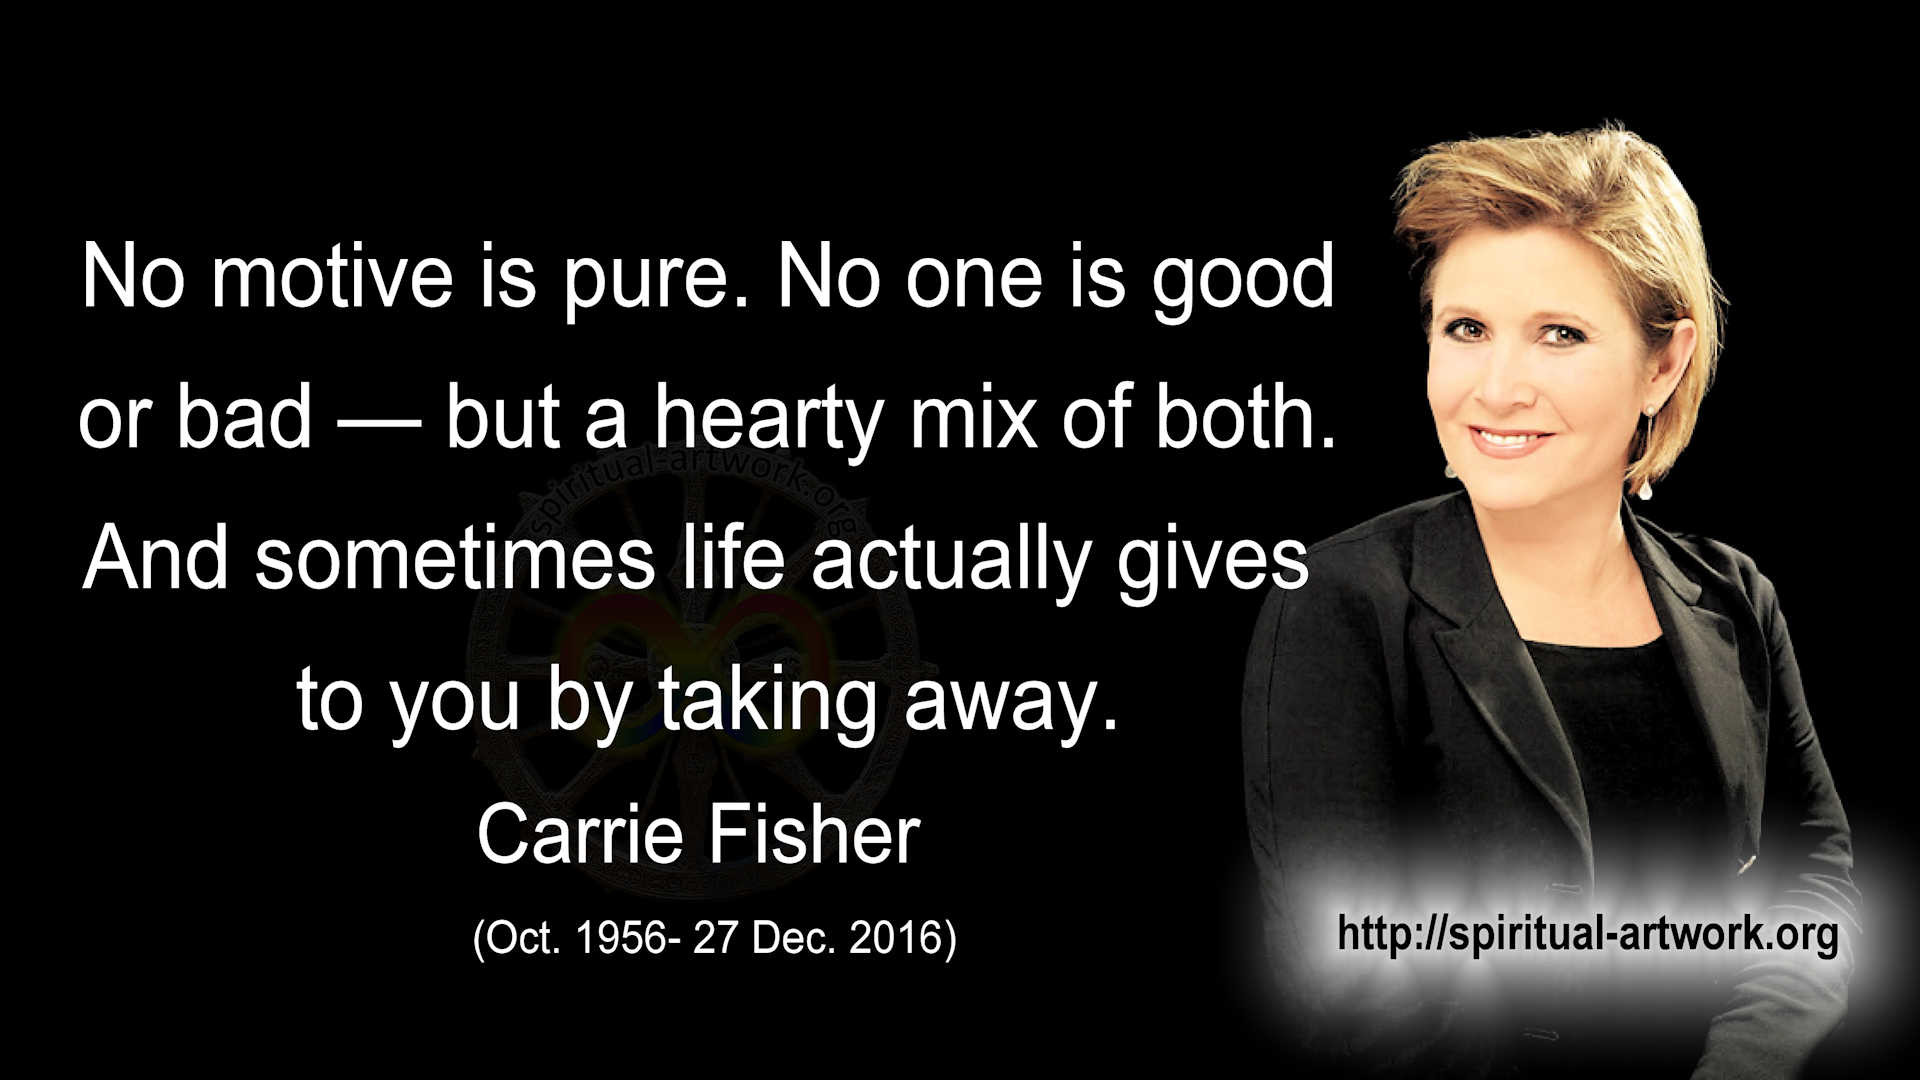 Carrie Fisher No Motive Is Pure No One Is Good Or Bad But A Hearty Mix Of Both 1920x1080